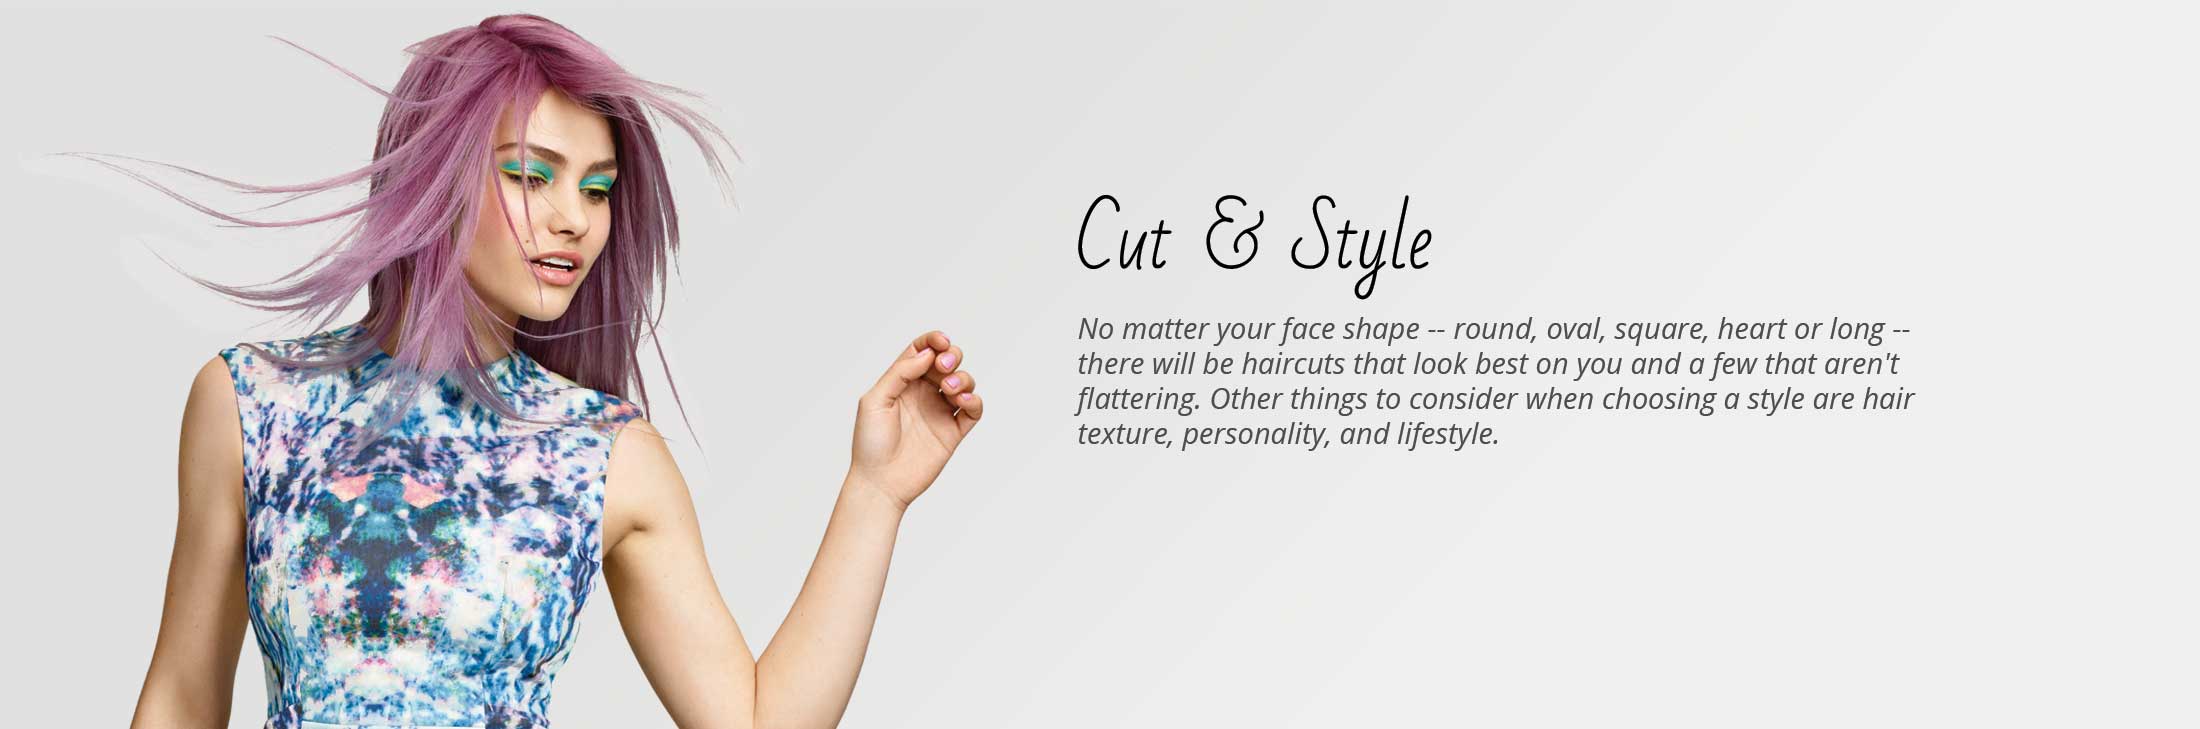 professional cut and style services | Park West Hair Design and Spa